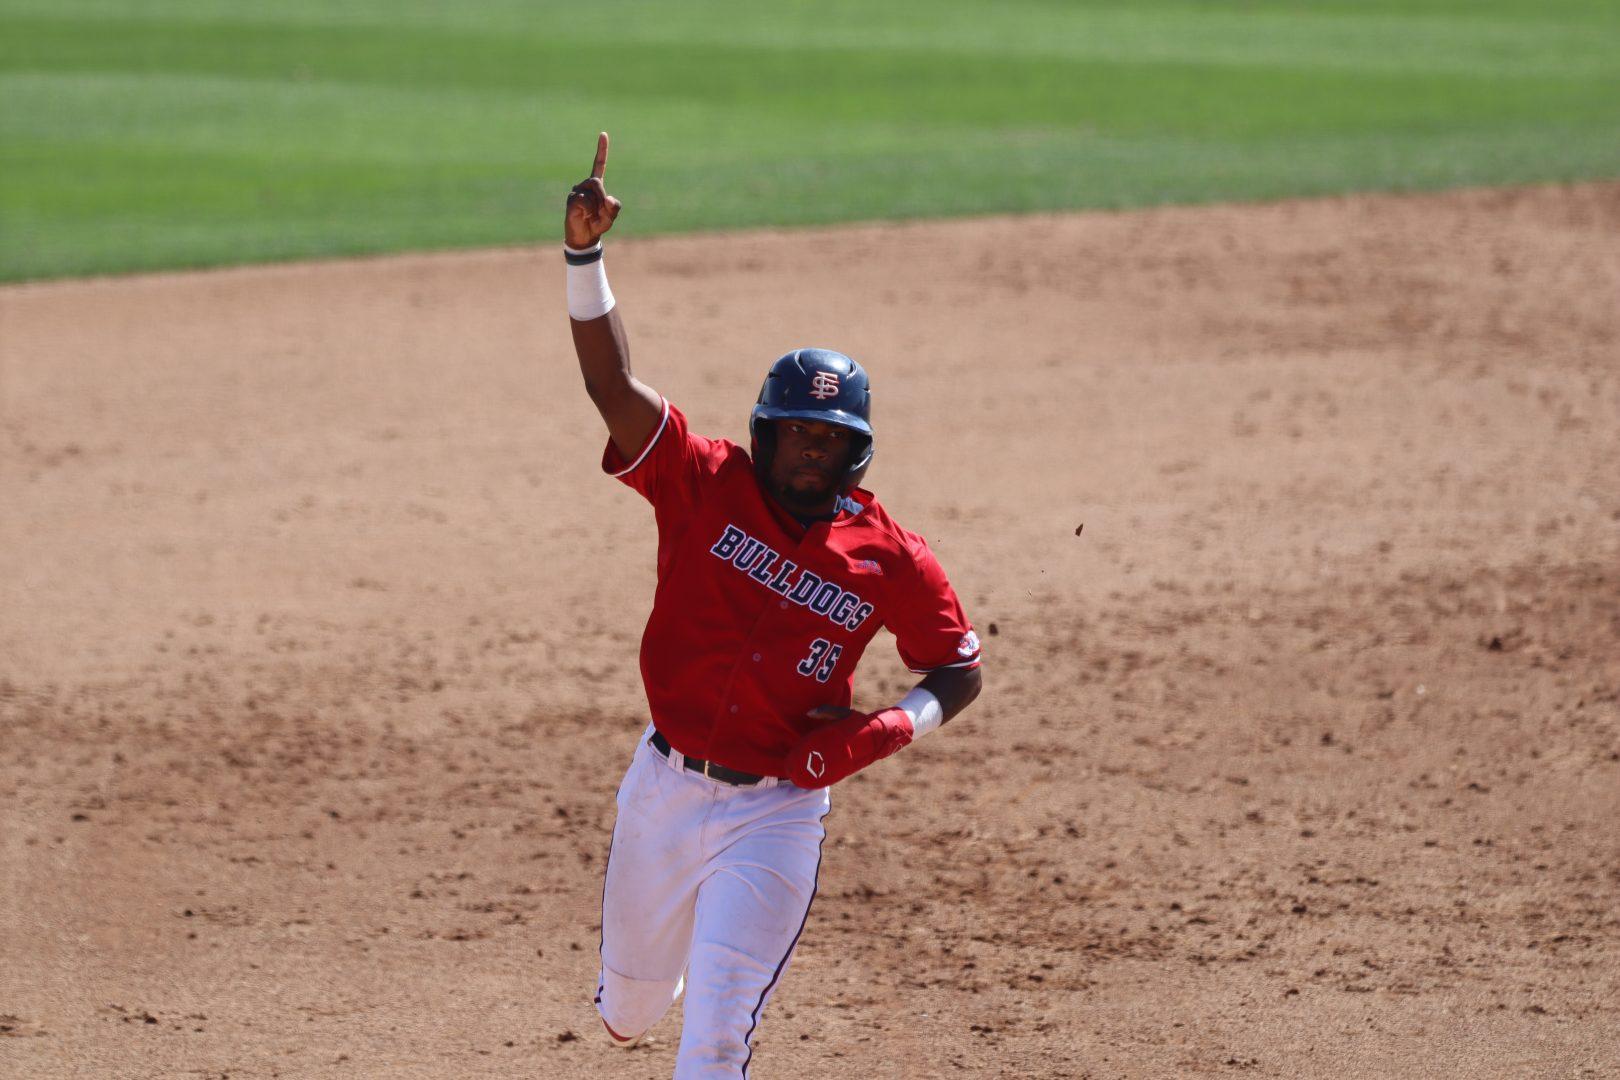 Fresno State outfielder E.J. Andrews, Jr. runs the bases in the sixth inning after Ryan Higgins hit a homerun in their game against Air Force on April 10, 2021, at Bob Bennett Stadium. (Kameron Thorn/The Collegian)